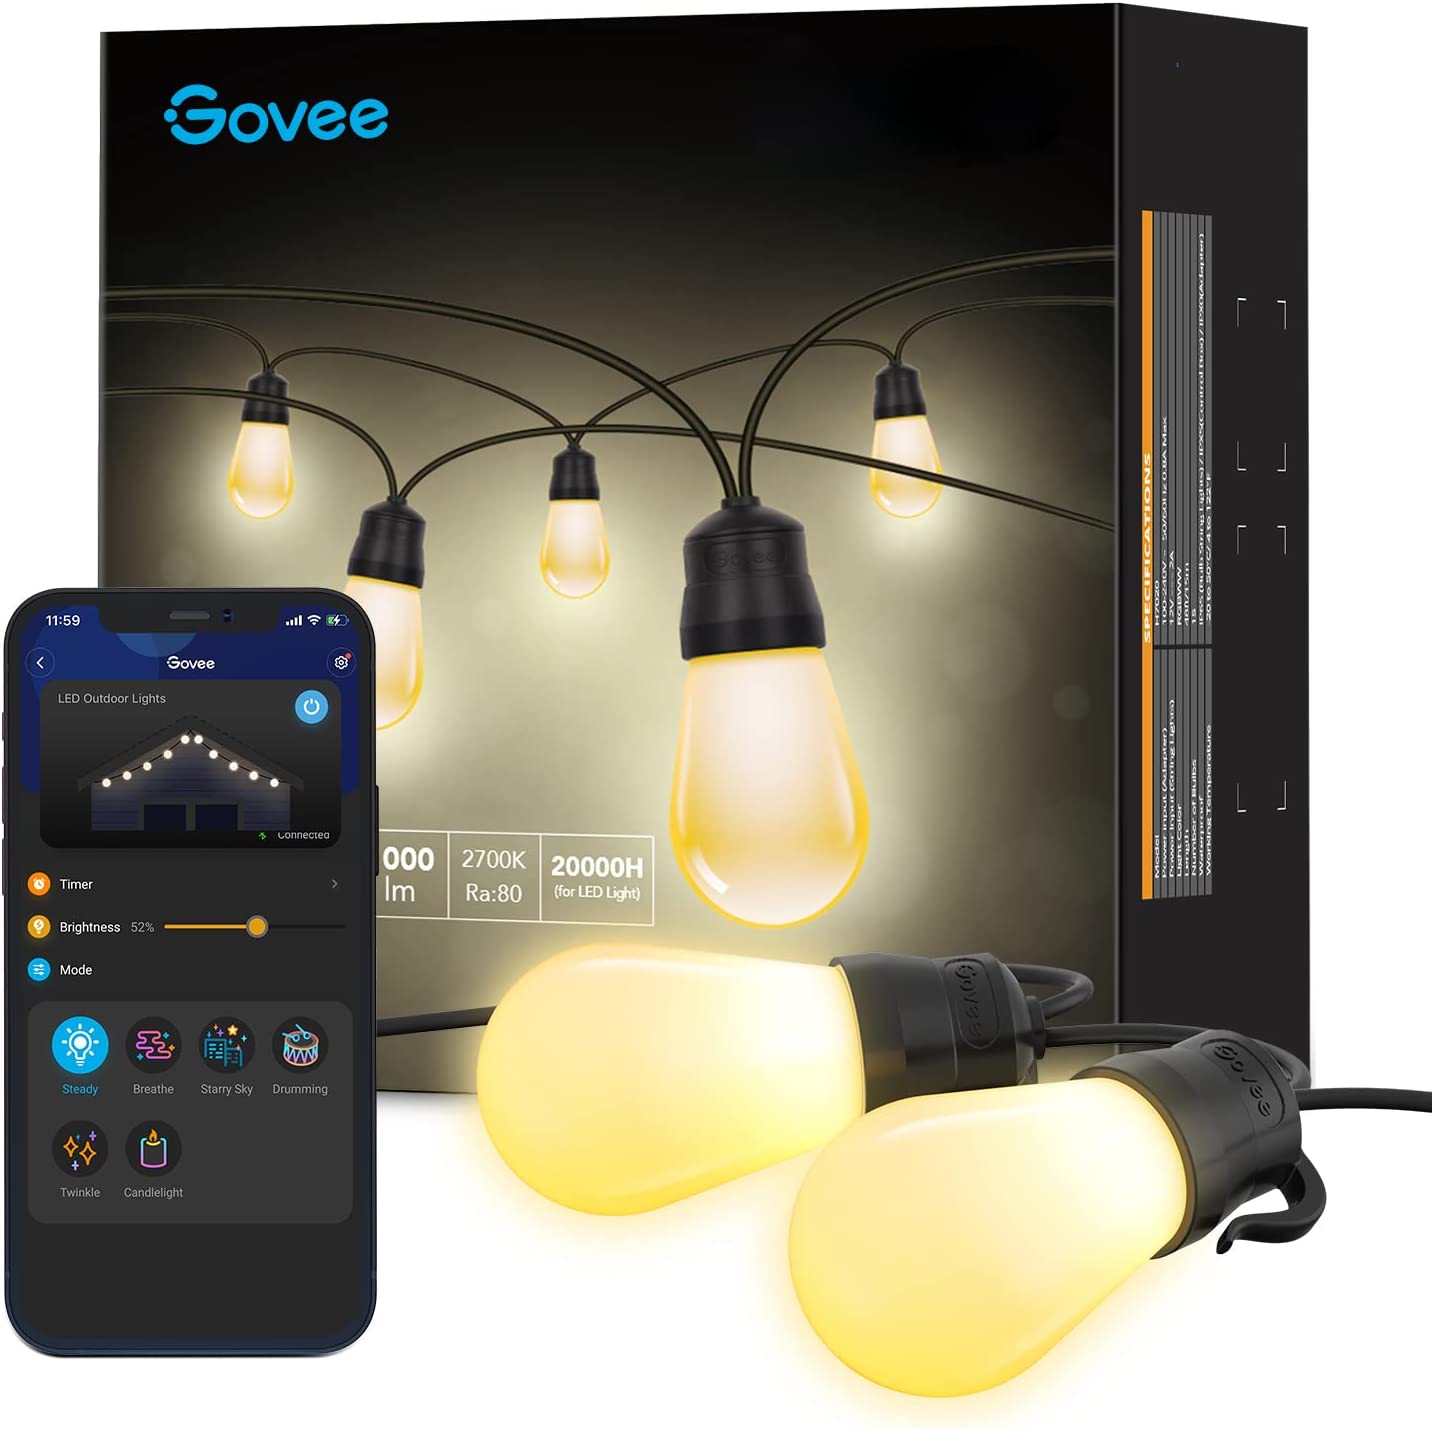 Govee Dimmable Smart LED Outdoor String Lights (Warm White): 50' 25-Bulb $20, 48' 15-Bulb $21.30 & More + Free Shipping